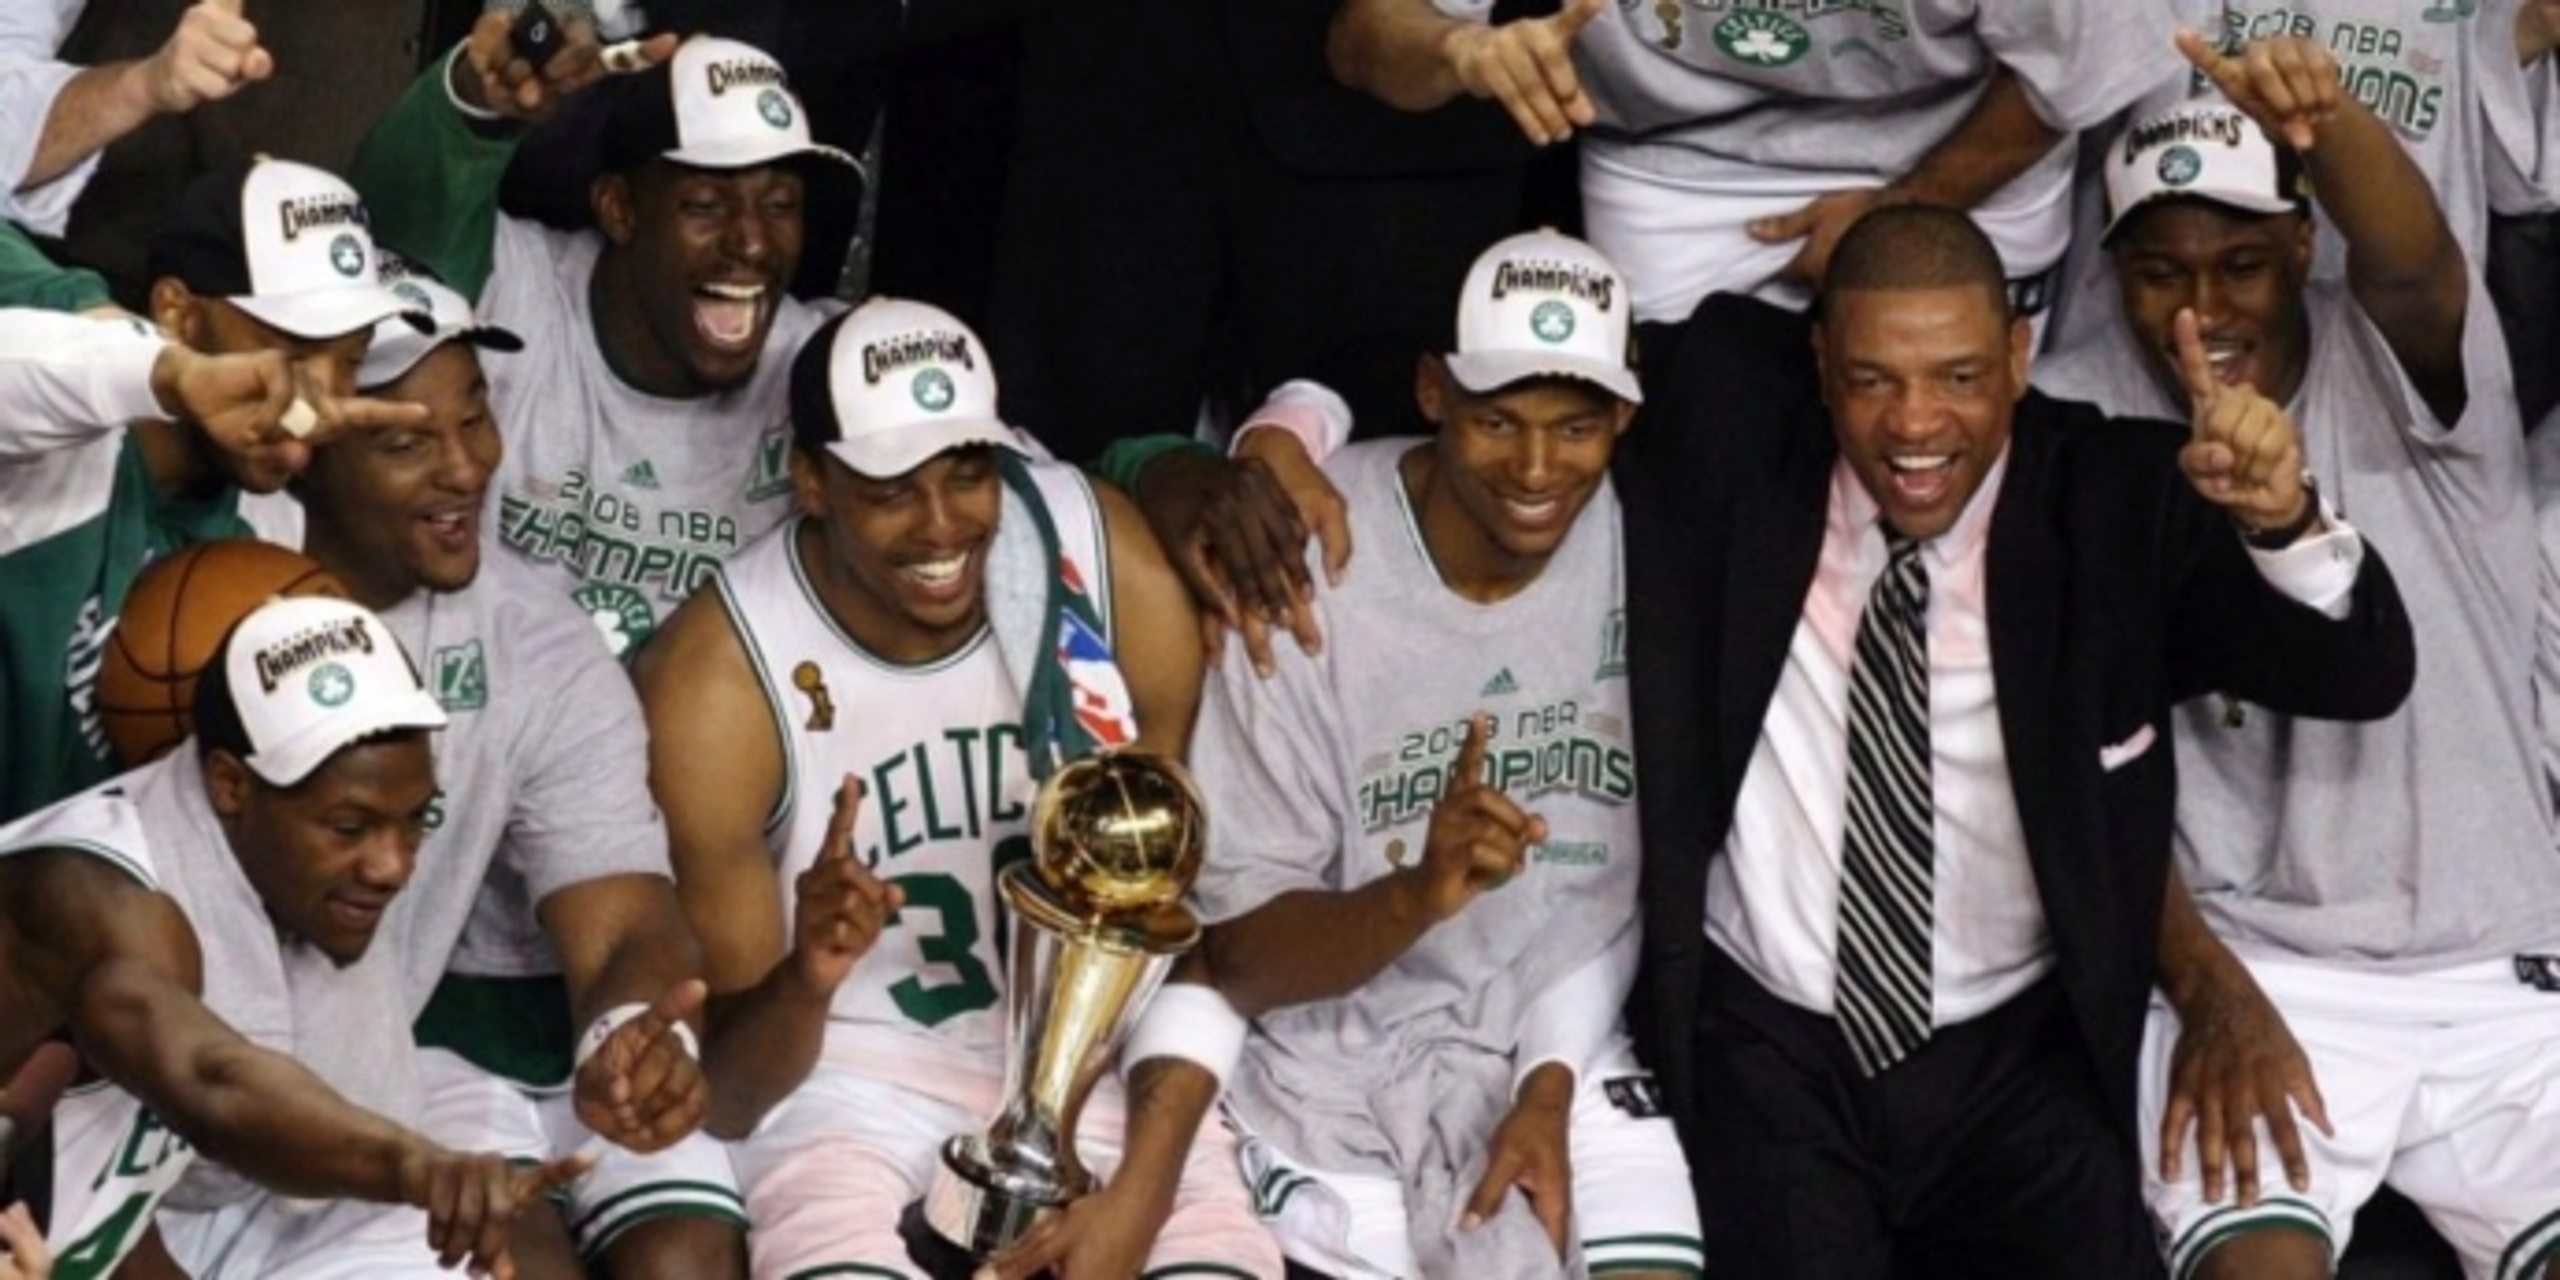 Championship or bust: Here's what it takes to win an NBA title